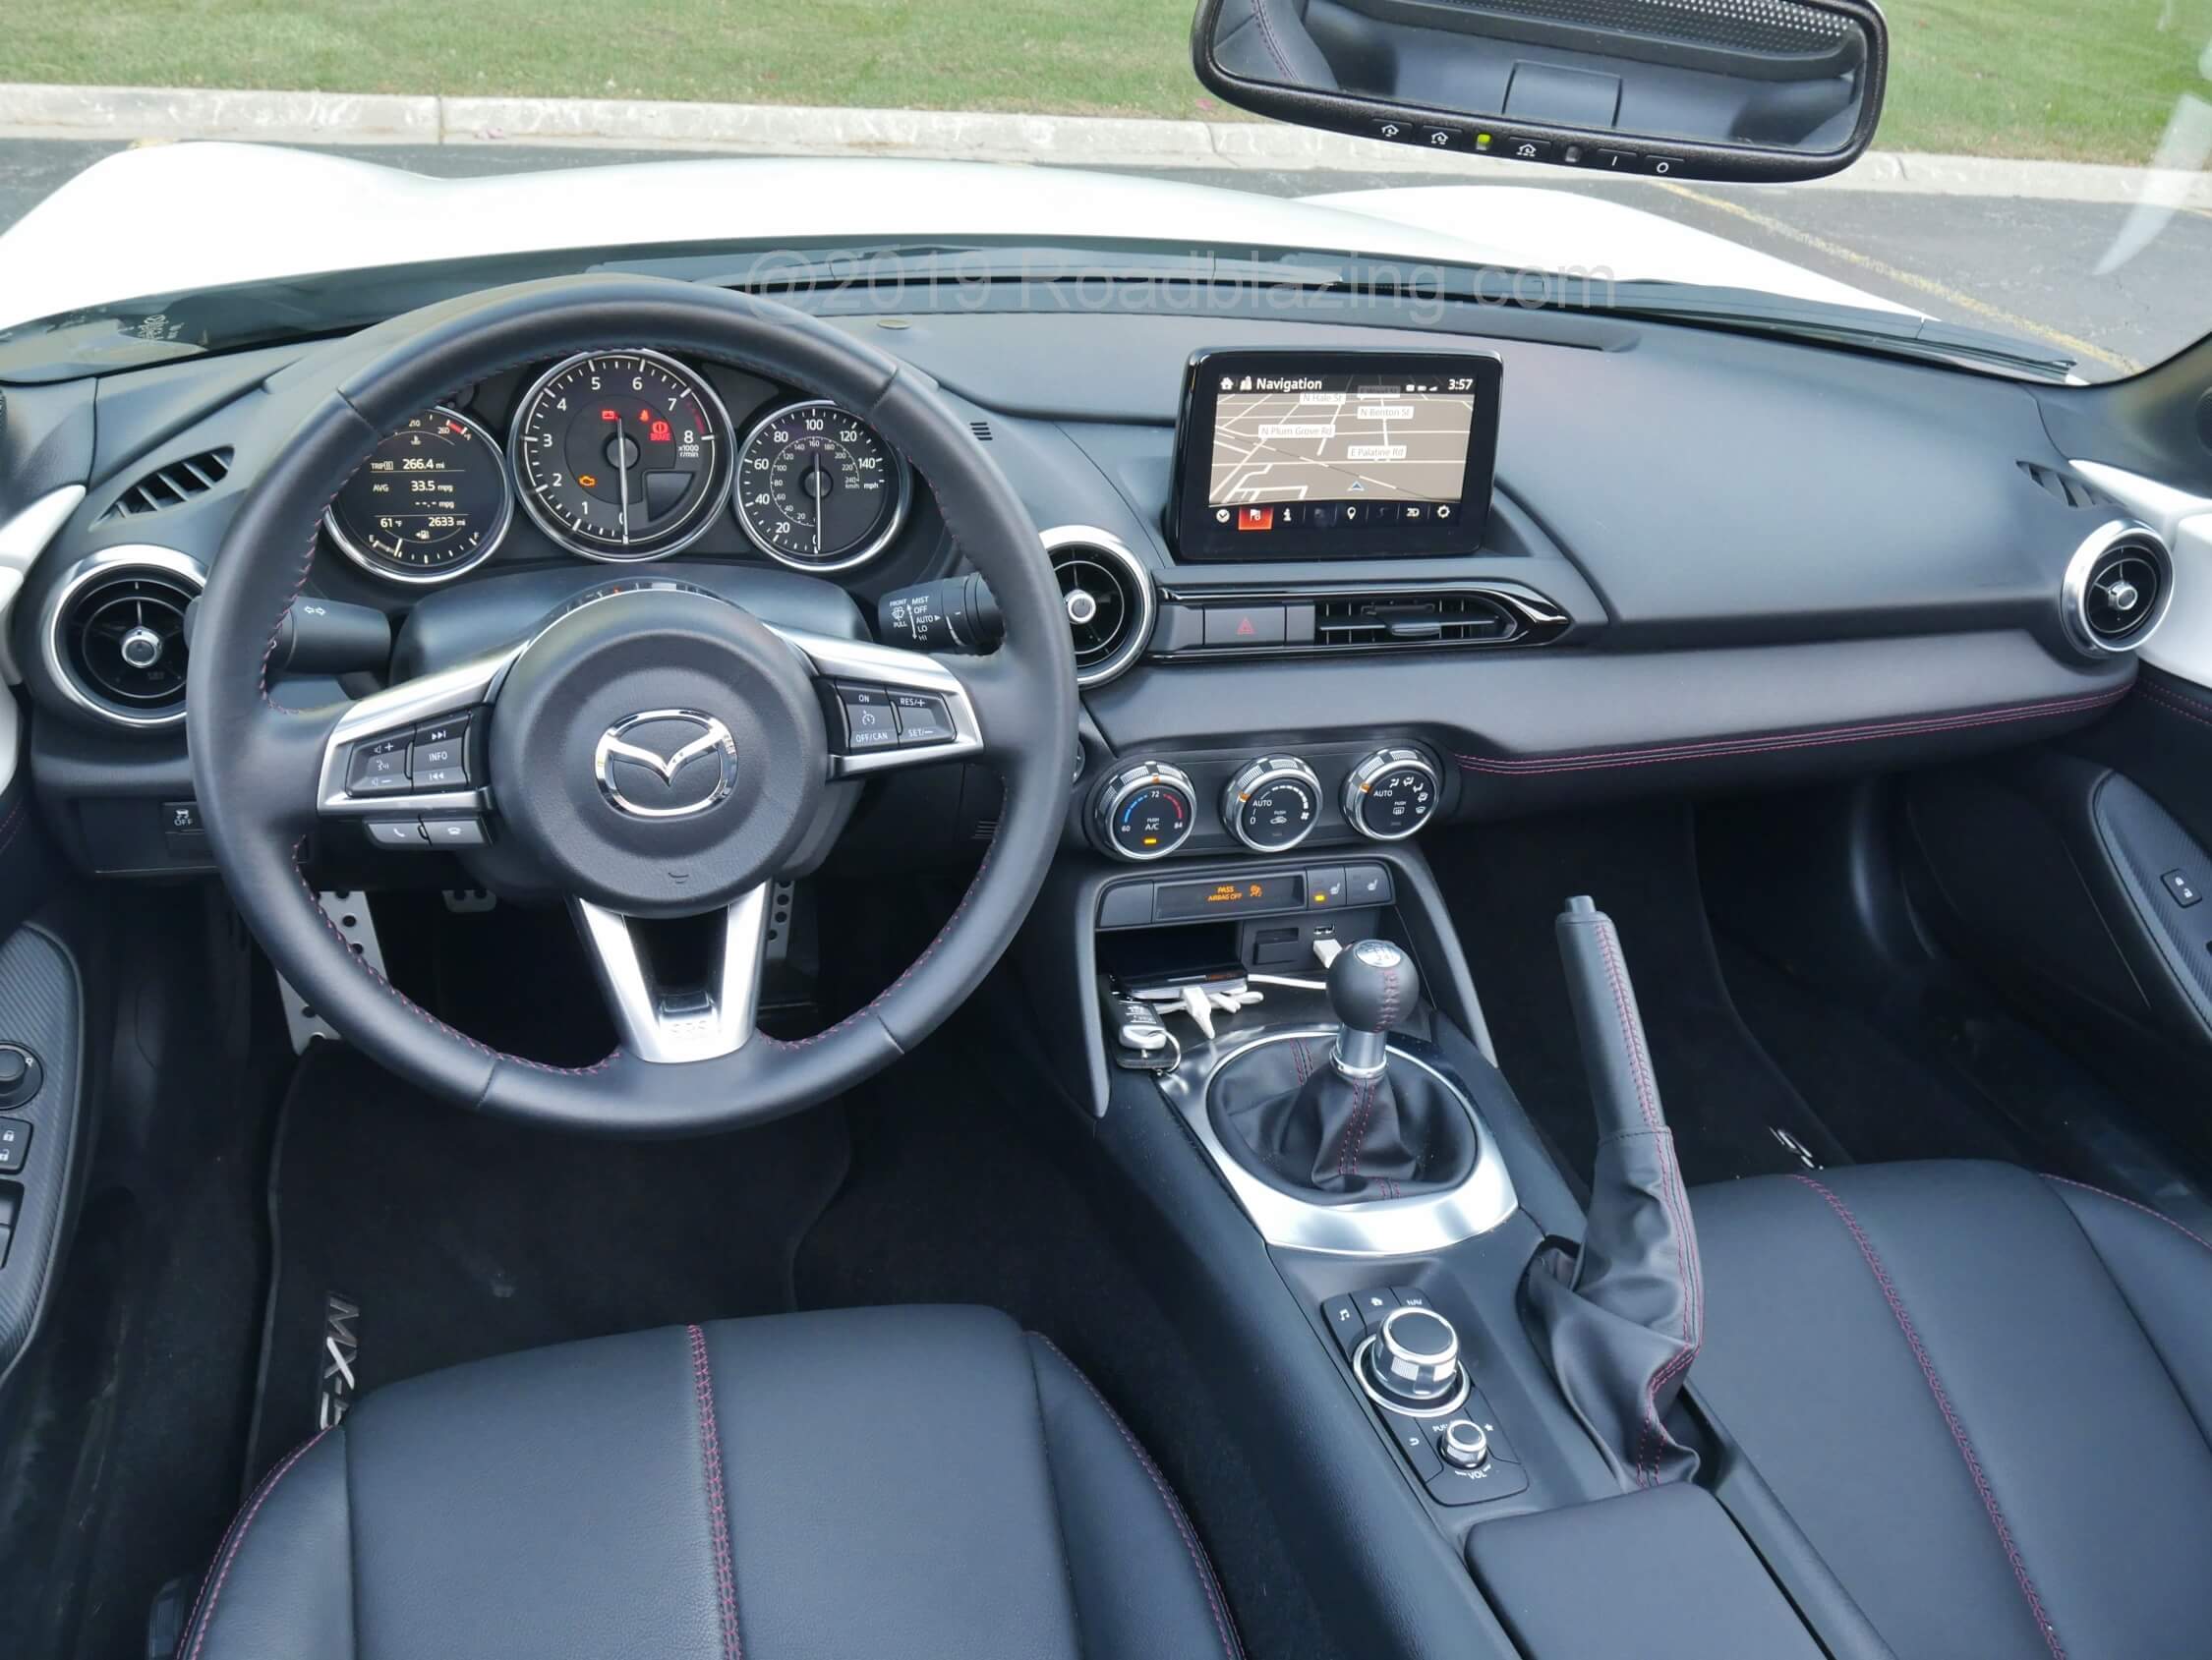 2019 Mazda MX-5 Grand Touring: Sensible cockpit derives pleasingly upscale touches from Mazda sedans / crossovers.